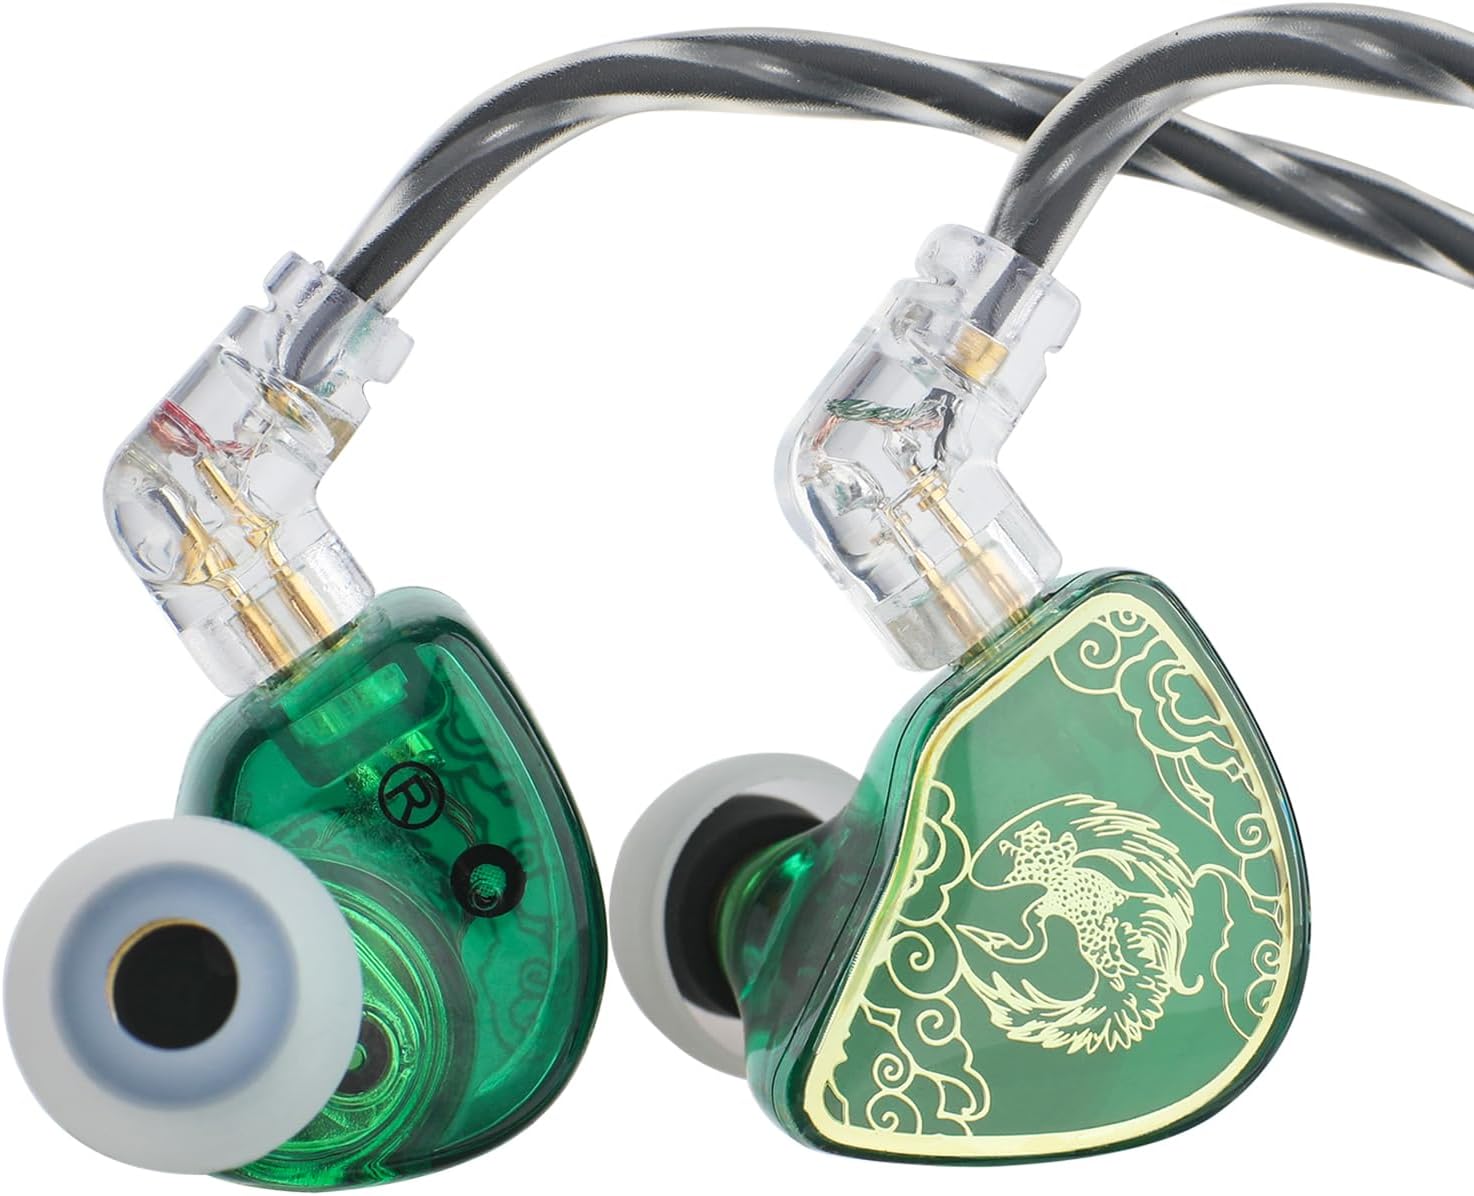 Linsoul TANGZU Wan’er S.G HiFi 10mm Dynamic Driver PET Diaphragm in-Ear Earphone with Ergonomic Shape, Detachable 2Pin OFC Braided Cable for Audiophile Musician DJ Stage (Green, with Mic)